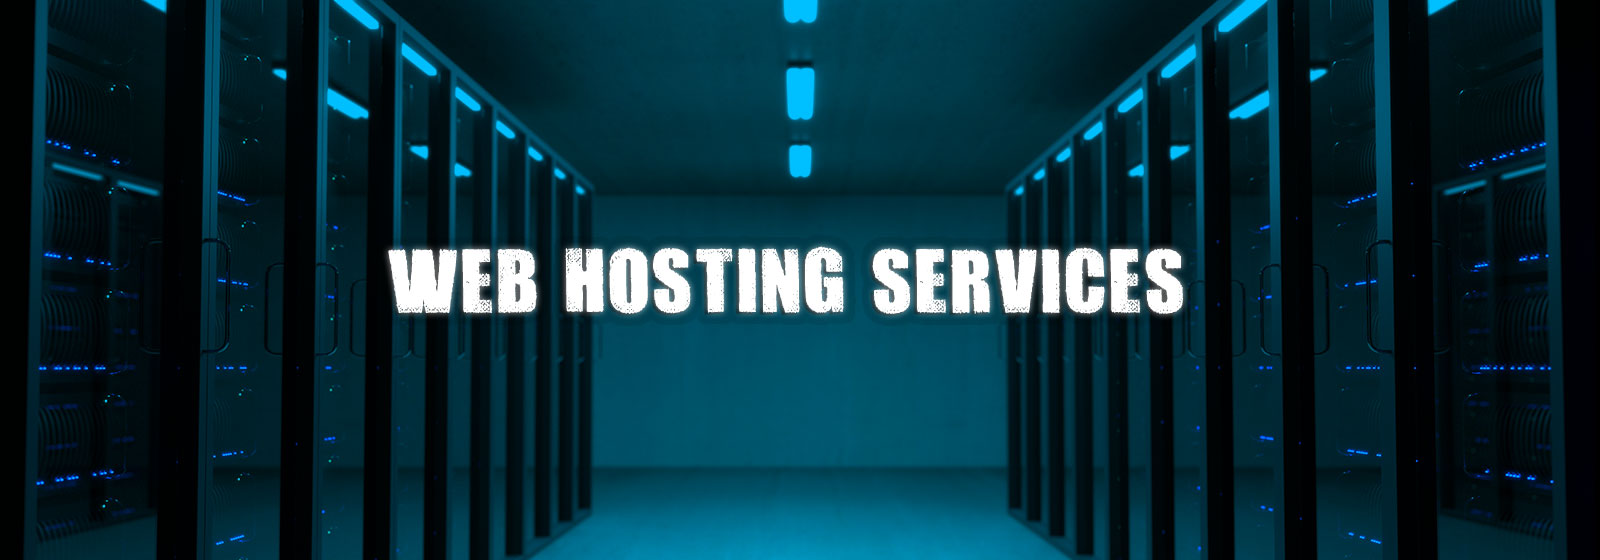 6 web-hosting services that you can consider using.